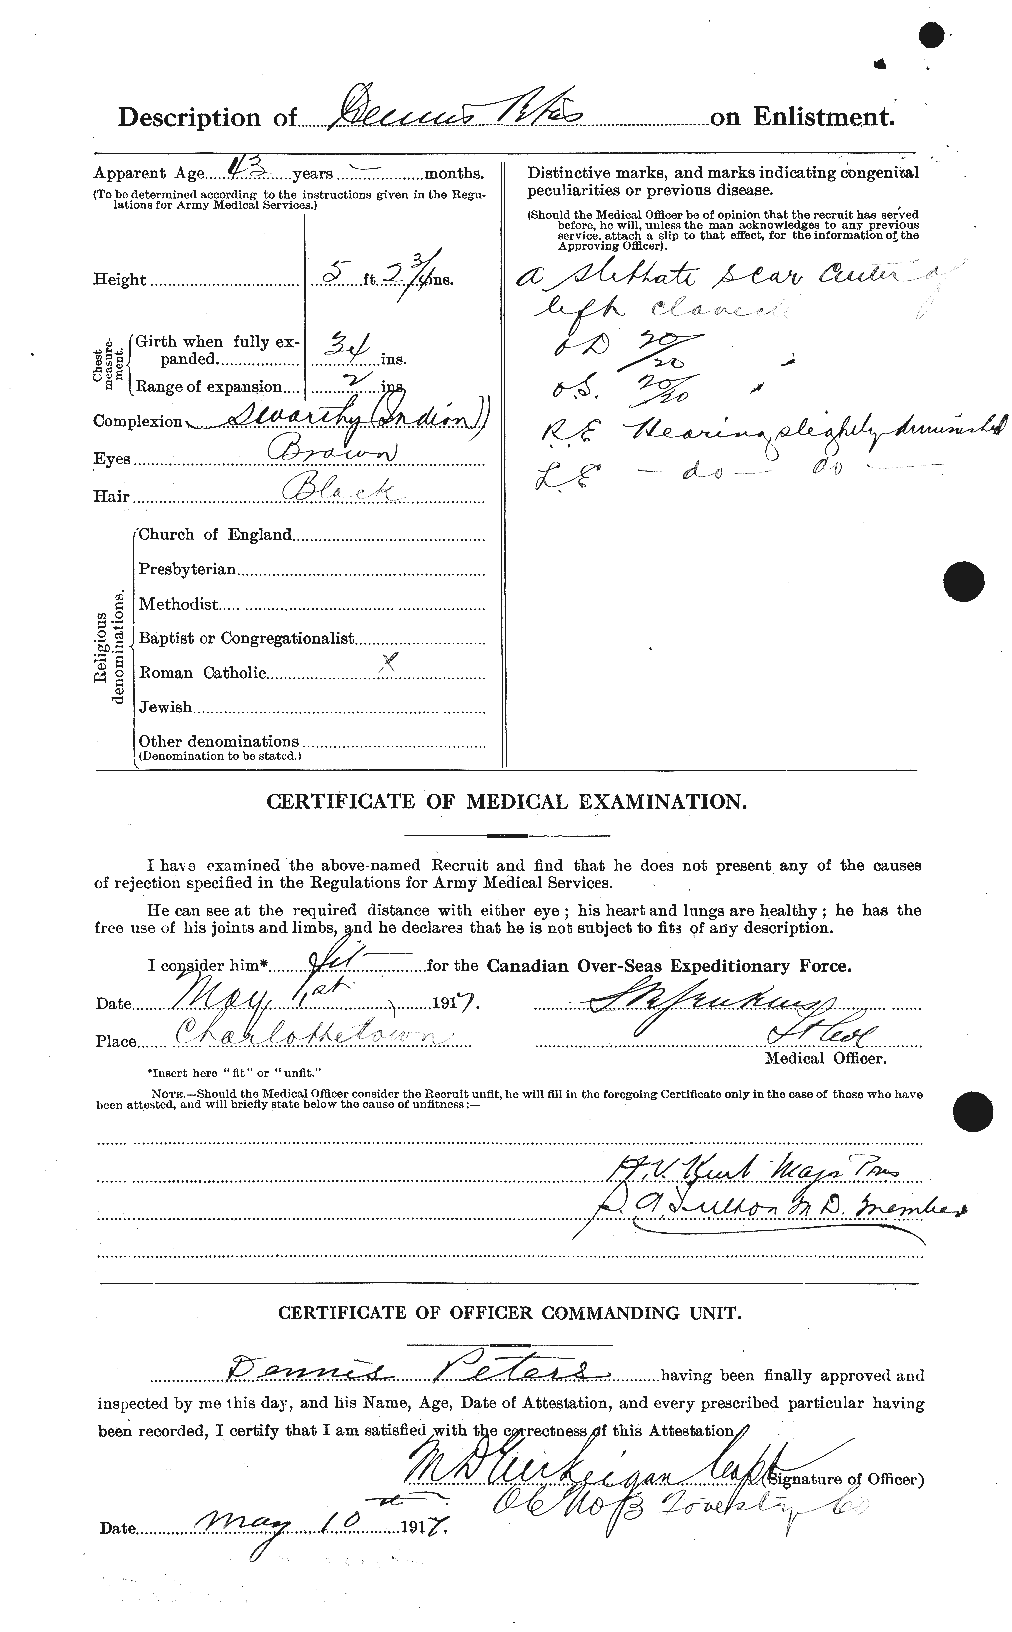 Personnel Records of the First World War - CEF 575393b